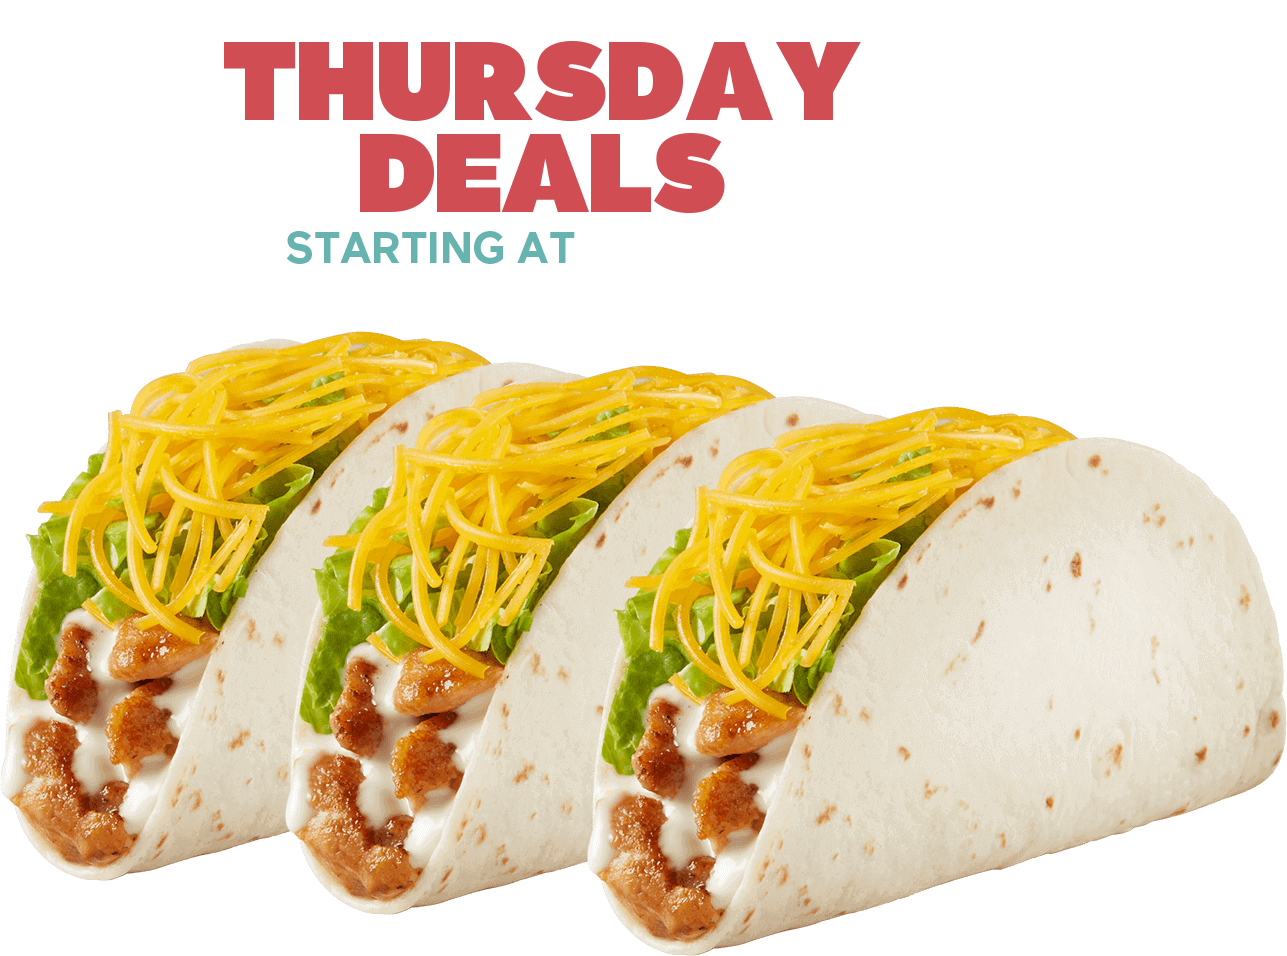 Every Thursday 3 Grilled Chicken Tacos $3.19 (mobile heading)